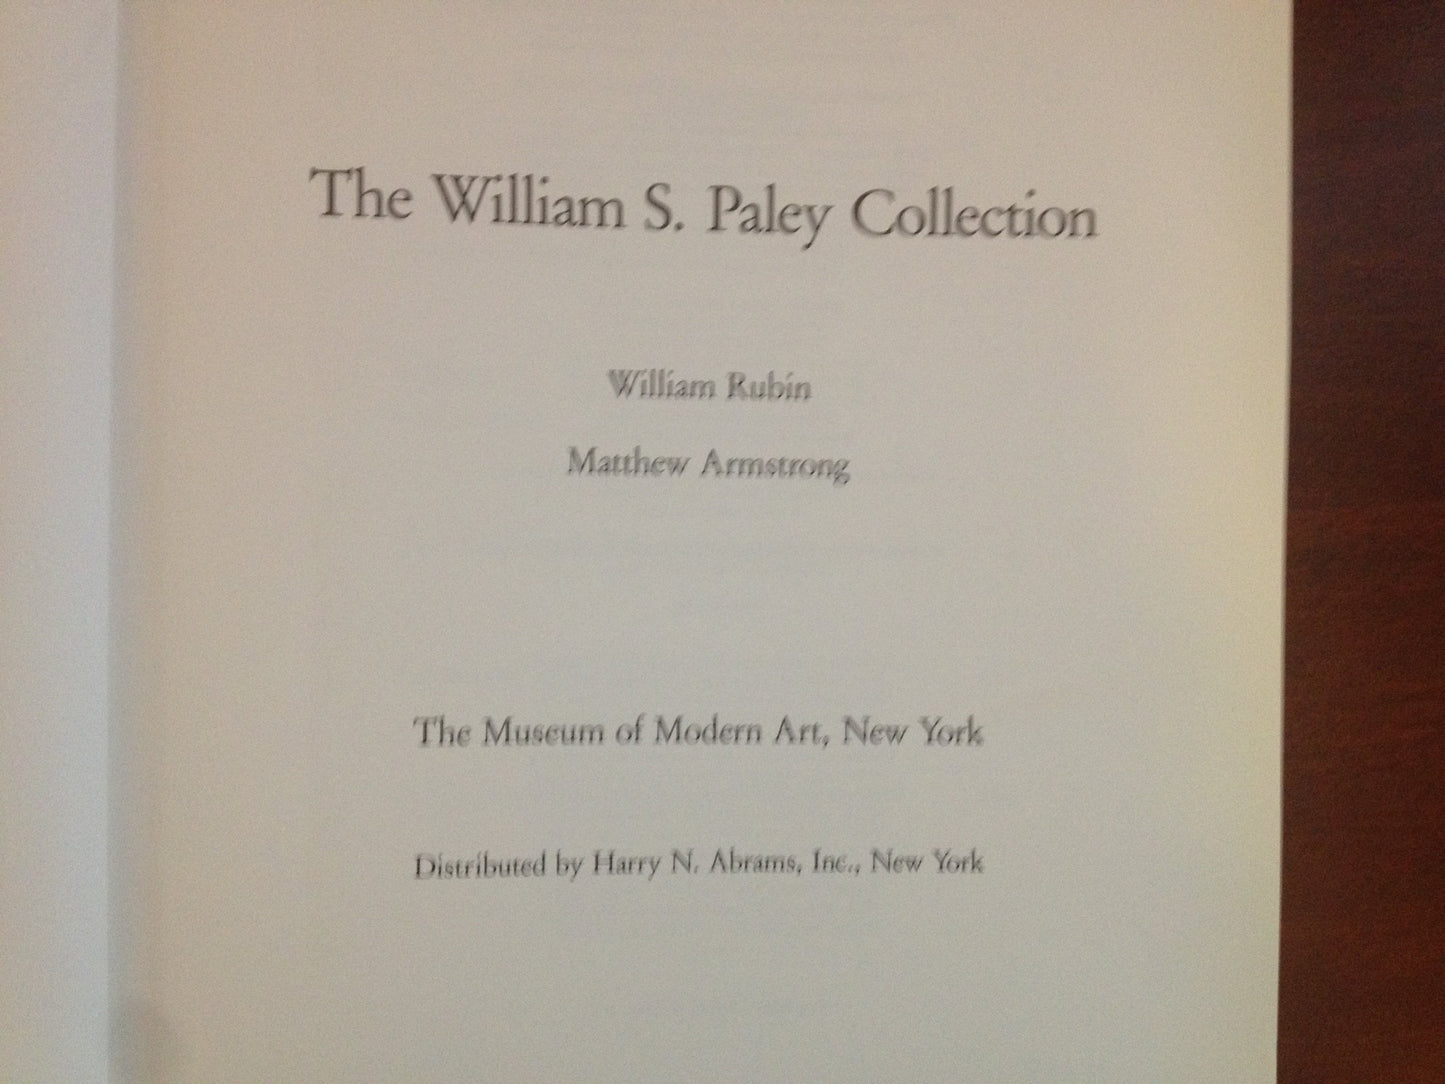 WILLIAM S. PALEY COLLECTION BY: WILLIAM RUBIN MATTHEW ARMSTRONG BooksCardsNBikes